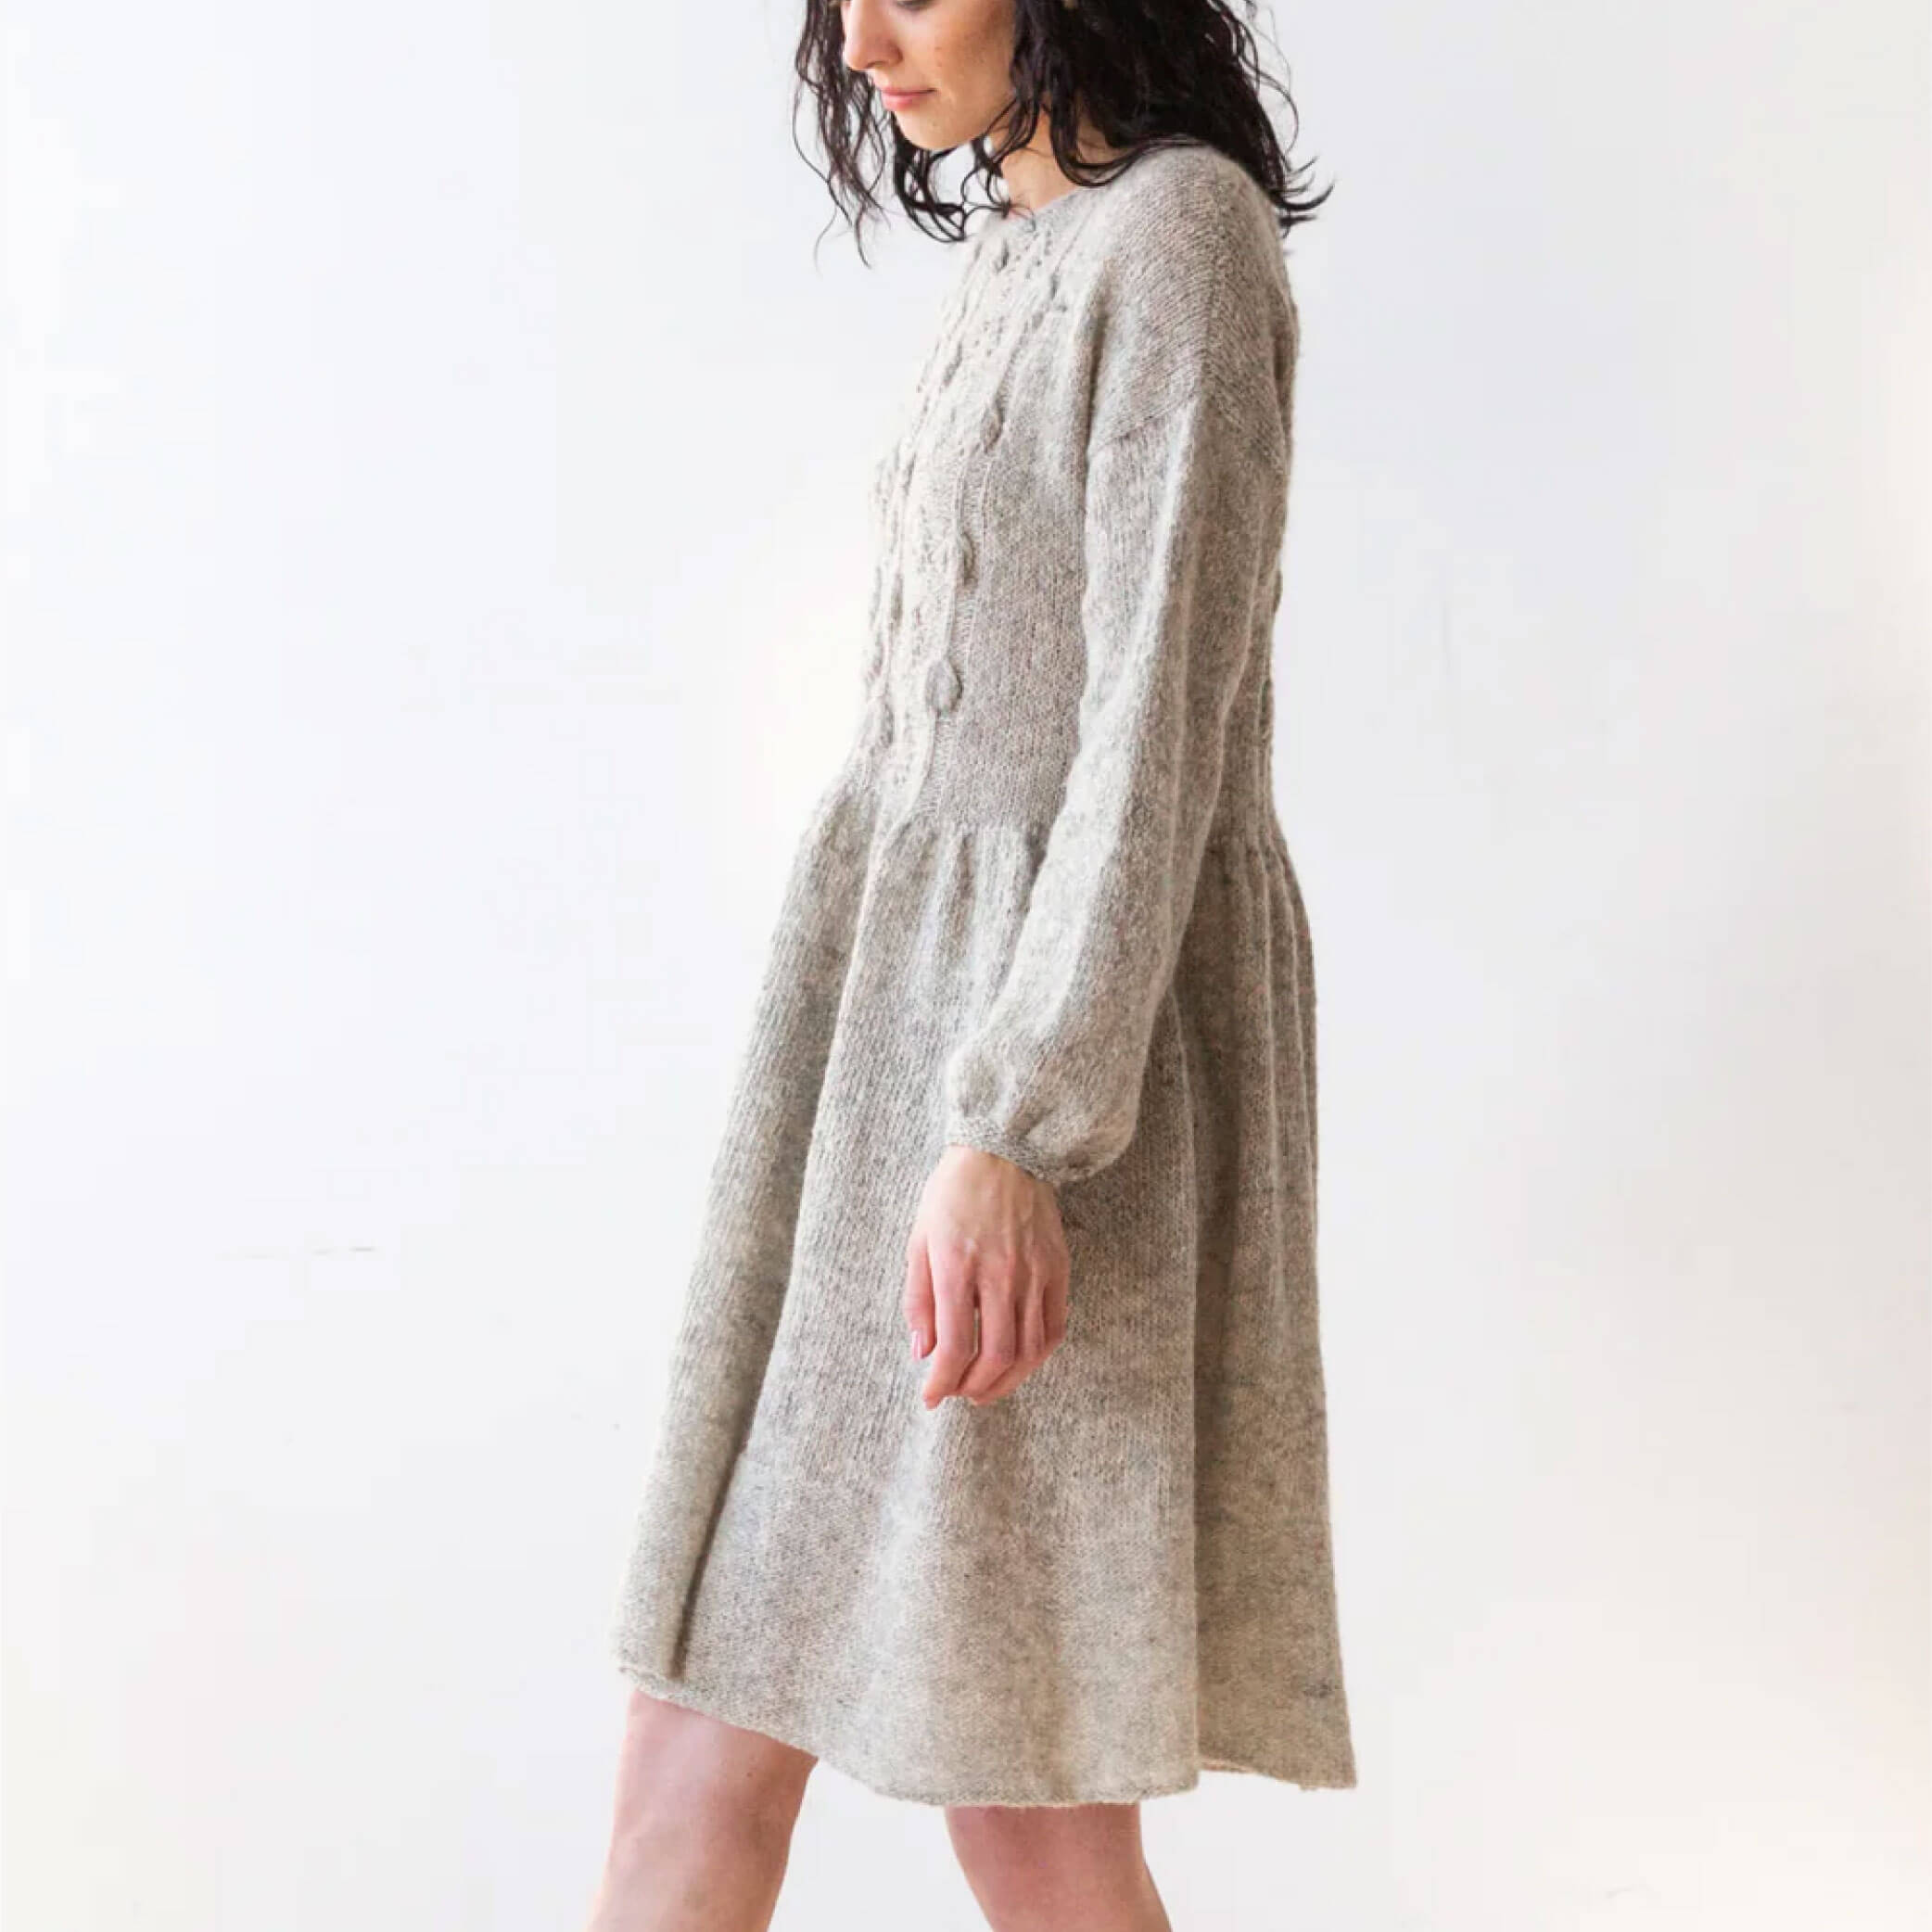 SWEETFERN ニットワンピース レシピ【Owlet】【Quince&Co】【seeknit】【編み図】【パターン】【ニットワンピース】☆レシピ｜syugei｜05